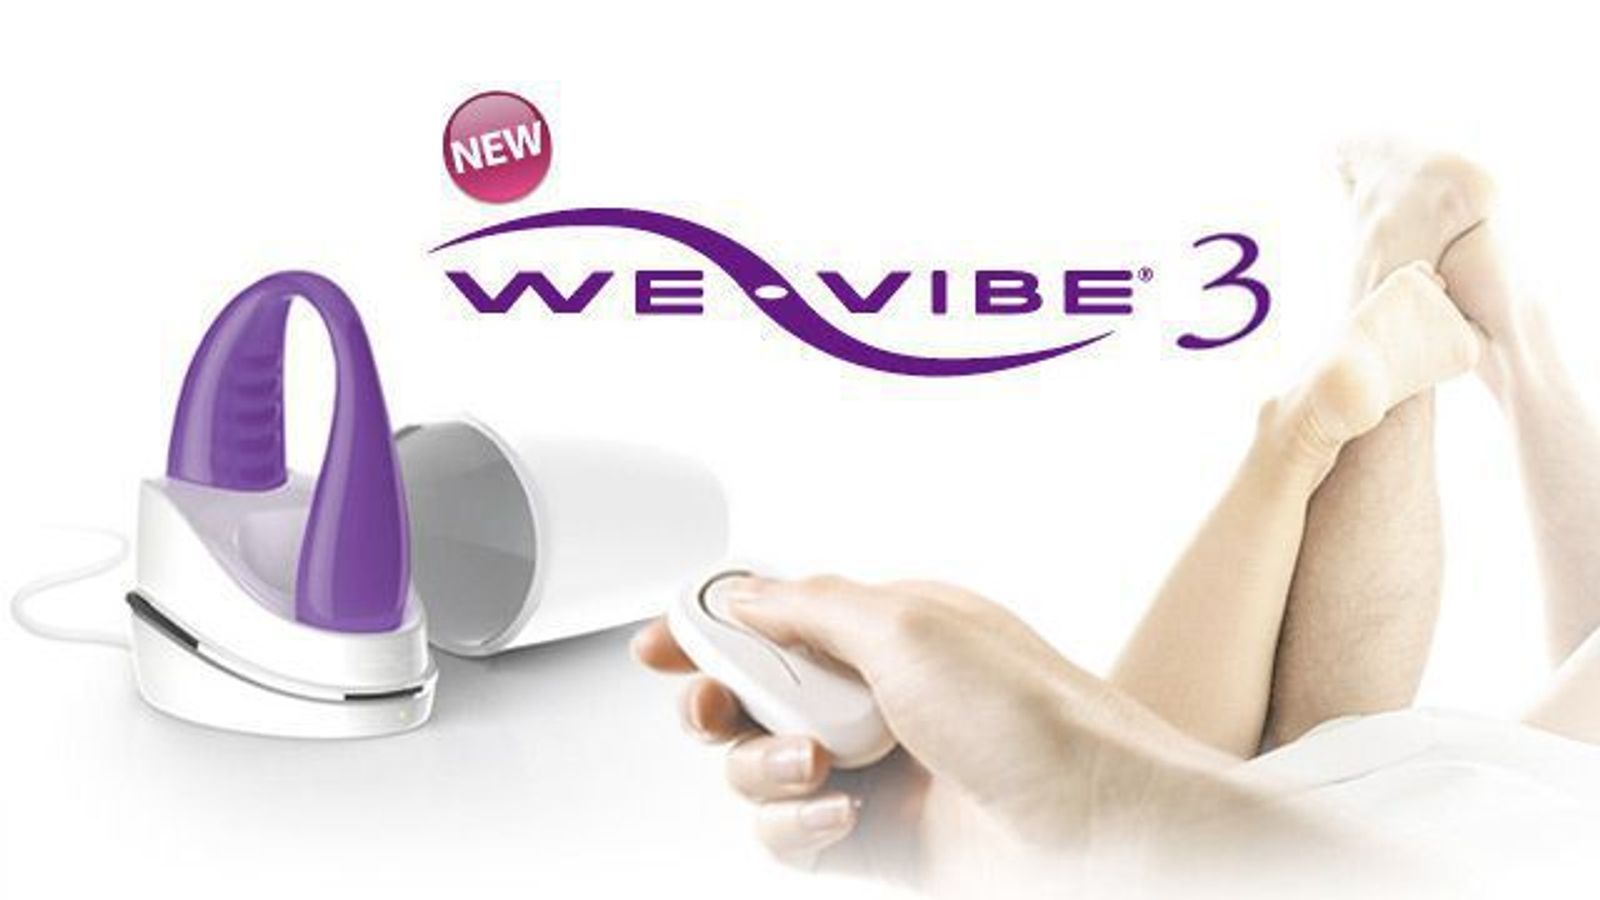 We-Vibe, Sexologist Dr. Trina Read Team Up To Offer Tips